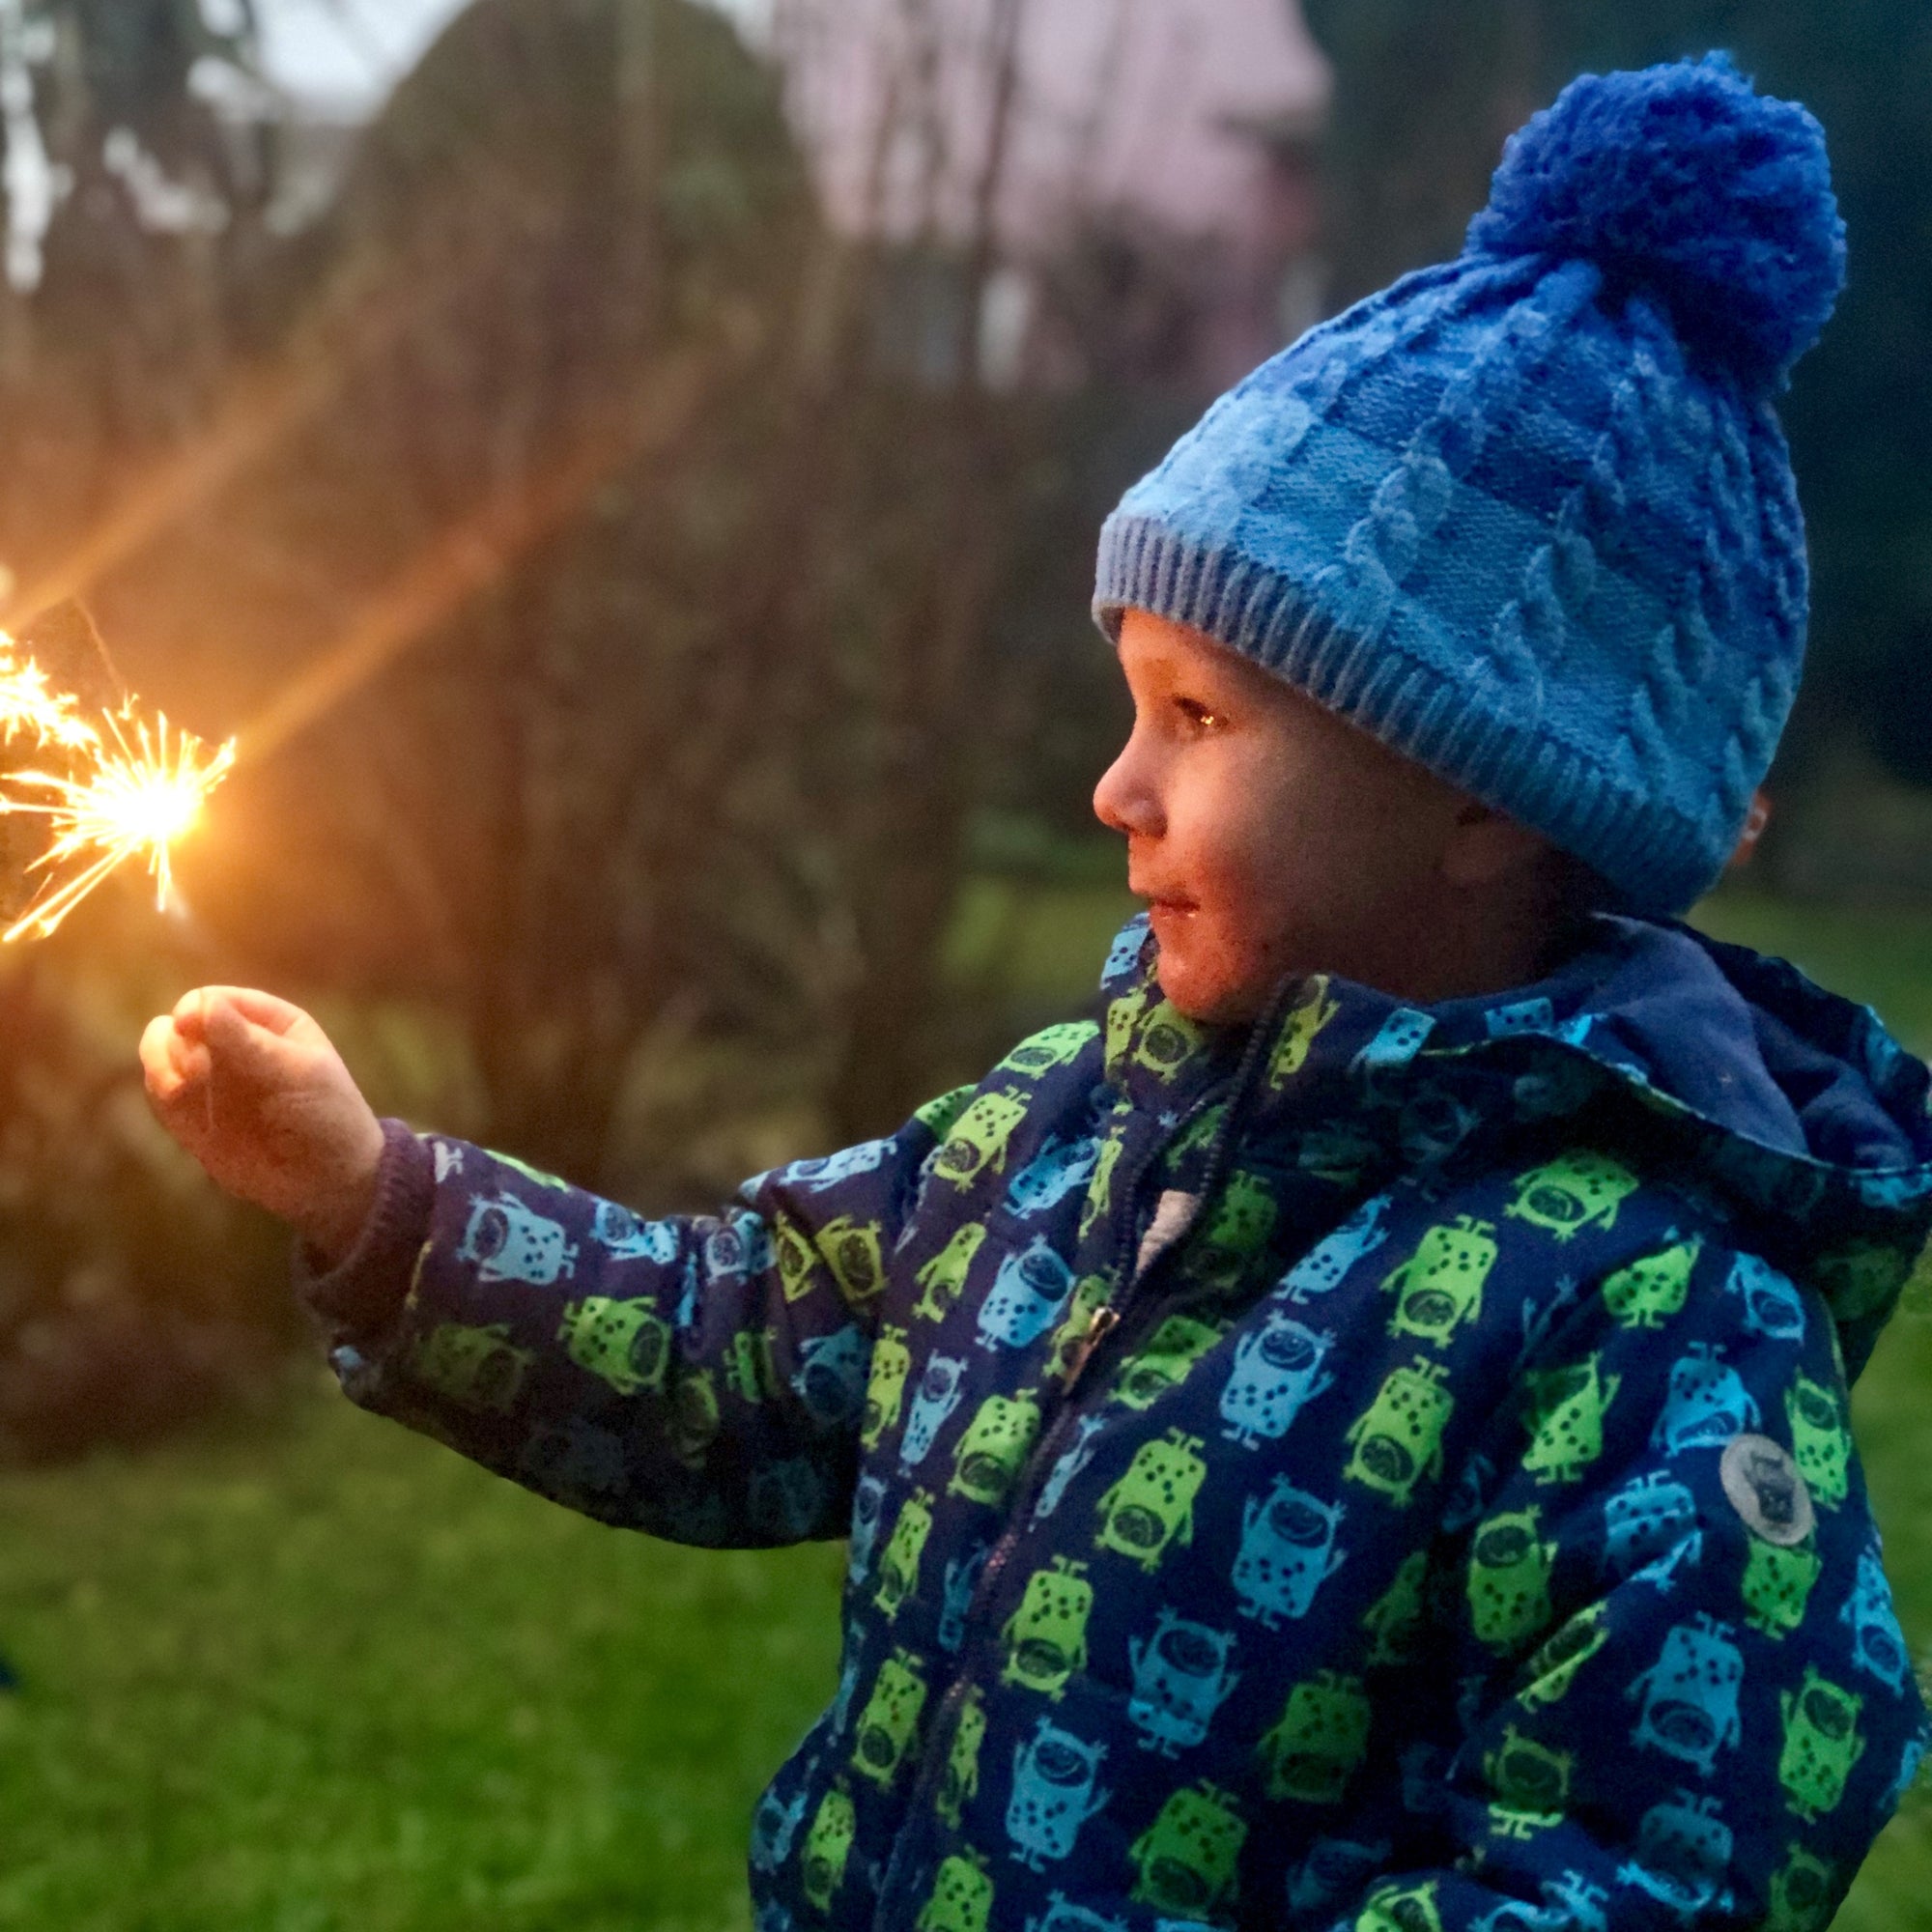 How to Treat Your Child's Firework Burns